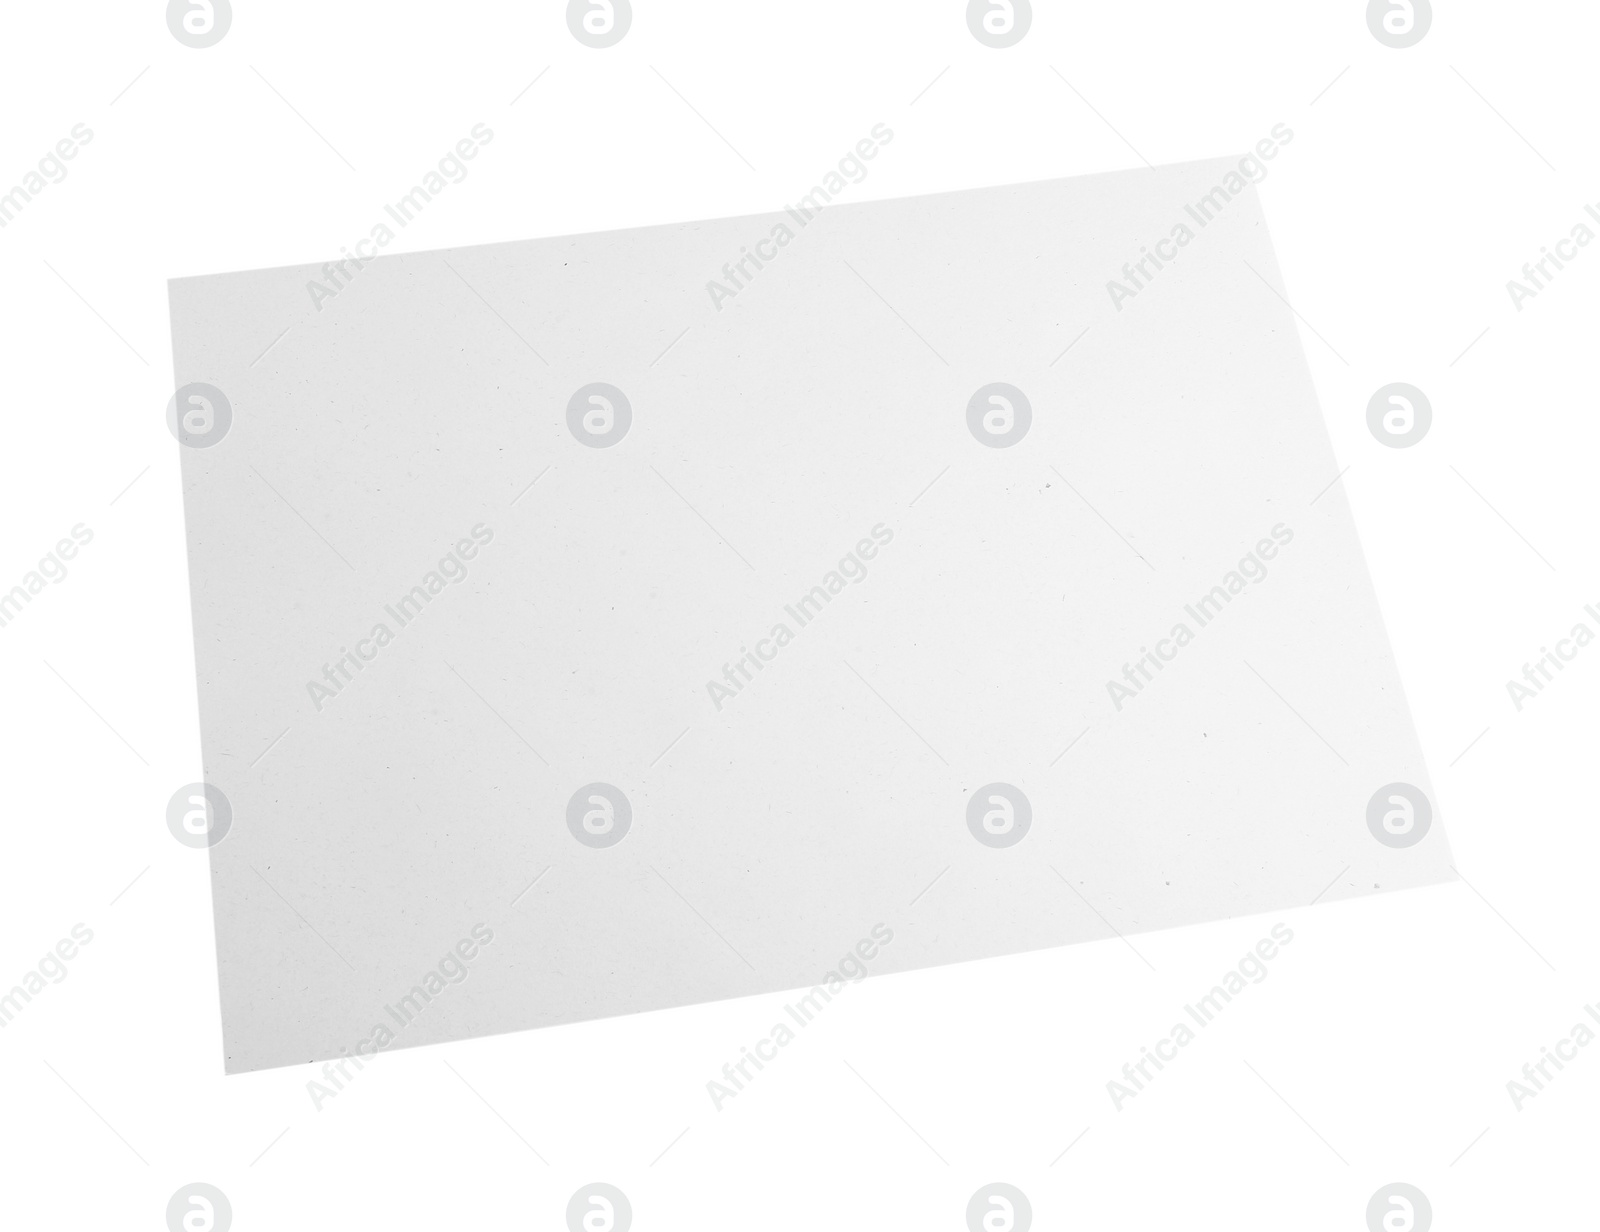 Photo of Sheet of parchment paper isolated on white